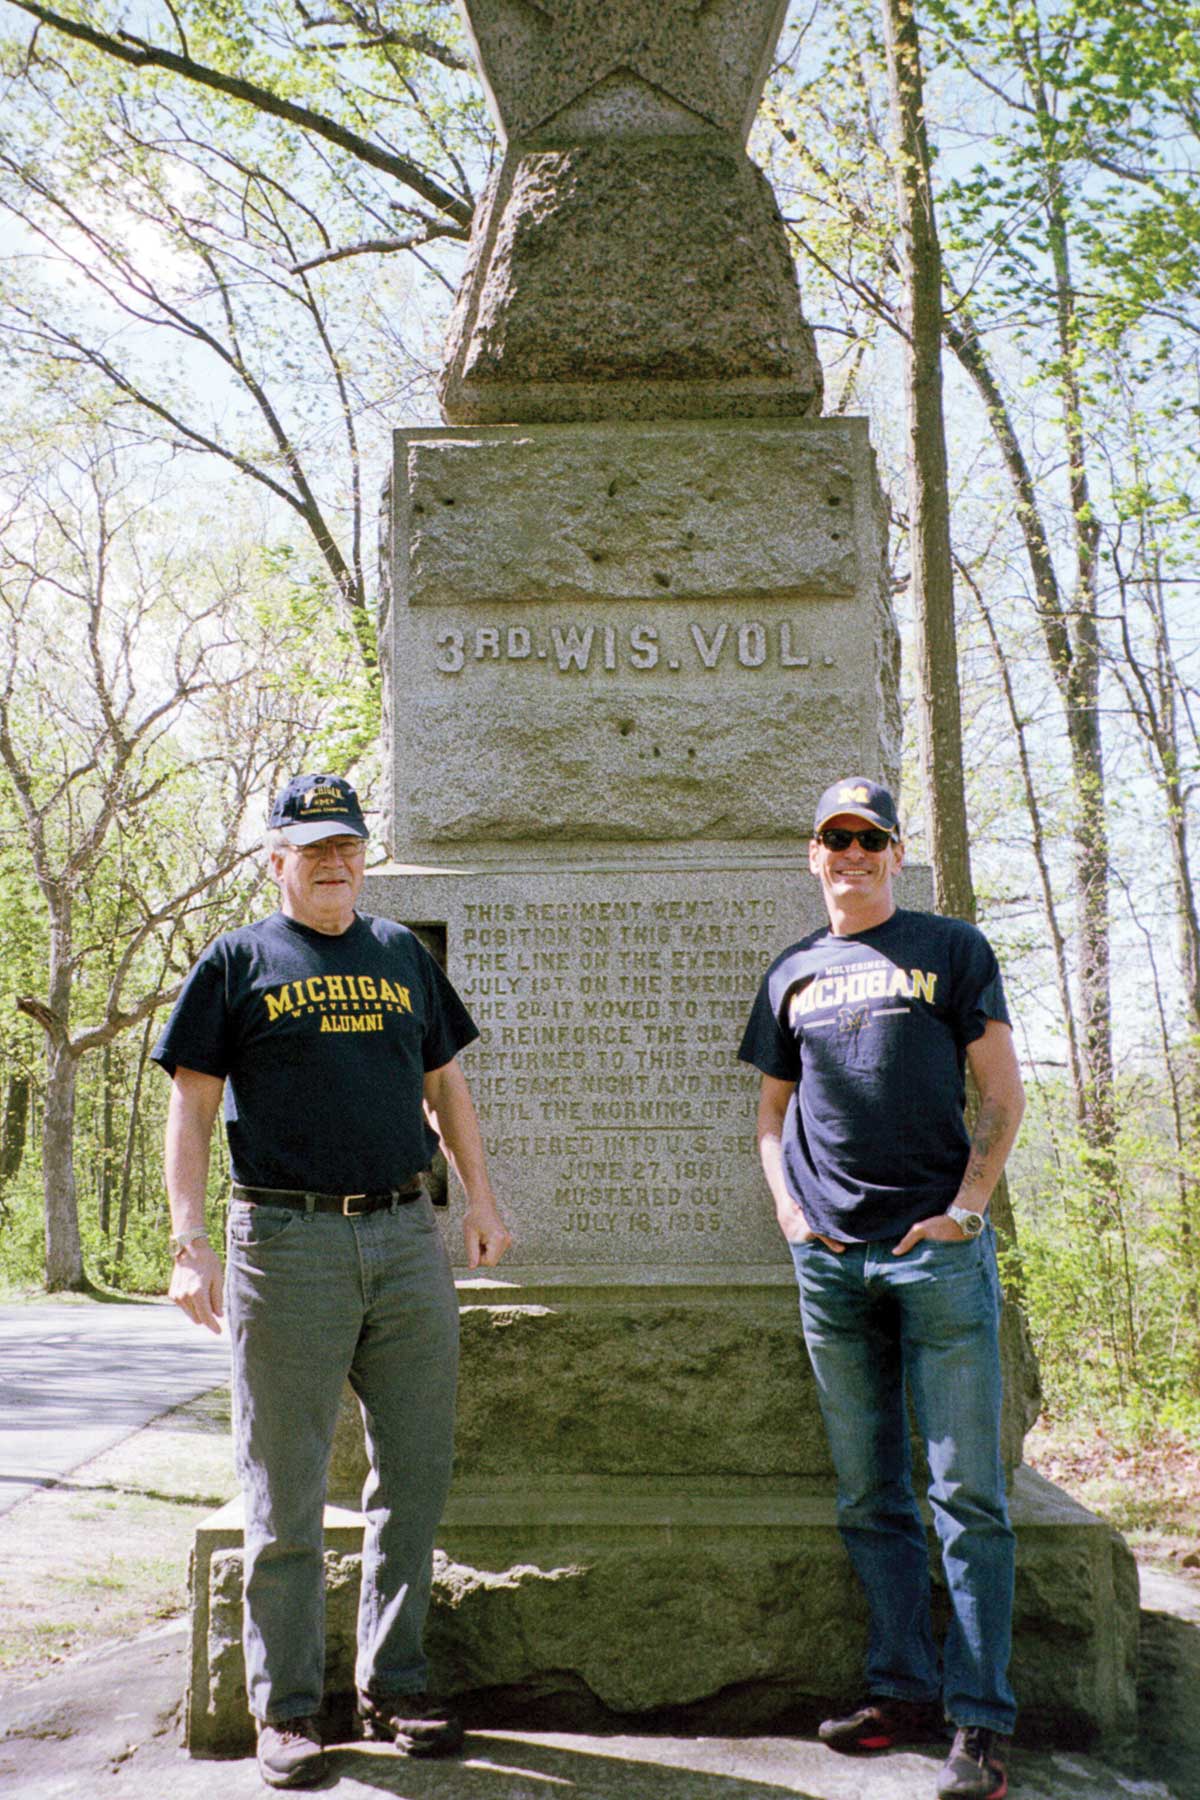 Steven Bartholomew, ’70, at left, with his sons Wade and Todd (off-camera), visited the 3rd Wisconsin Volunteer Infantry Monument on Culp’s Hill in Pennsylvania. Their ancestor, Samuel Bartholomew, served with this Union regiment at the 1863 Battle of Gettysburg.